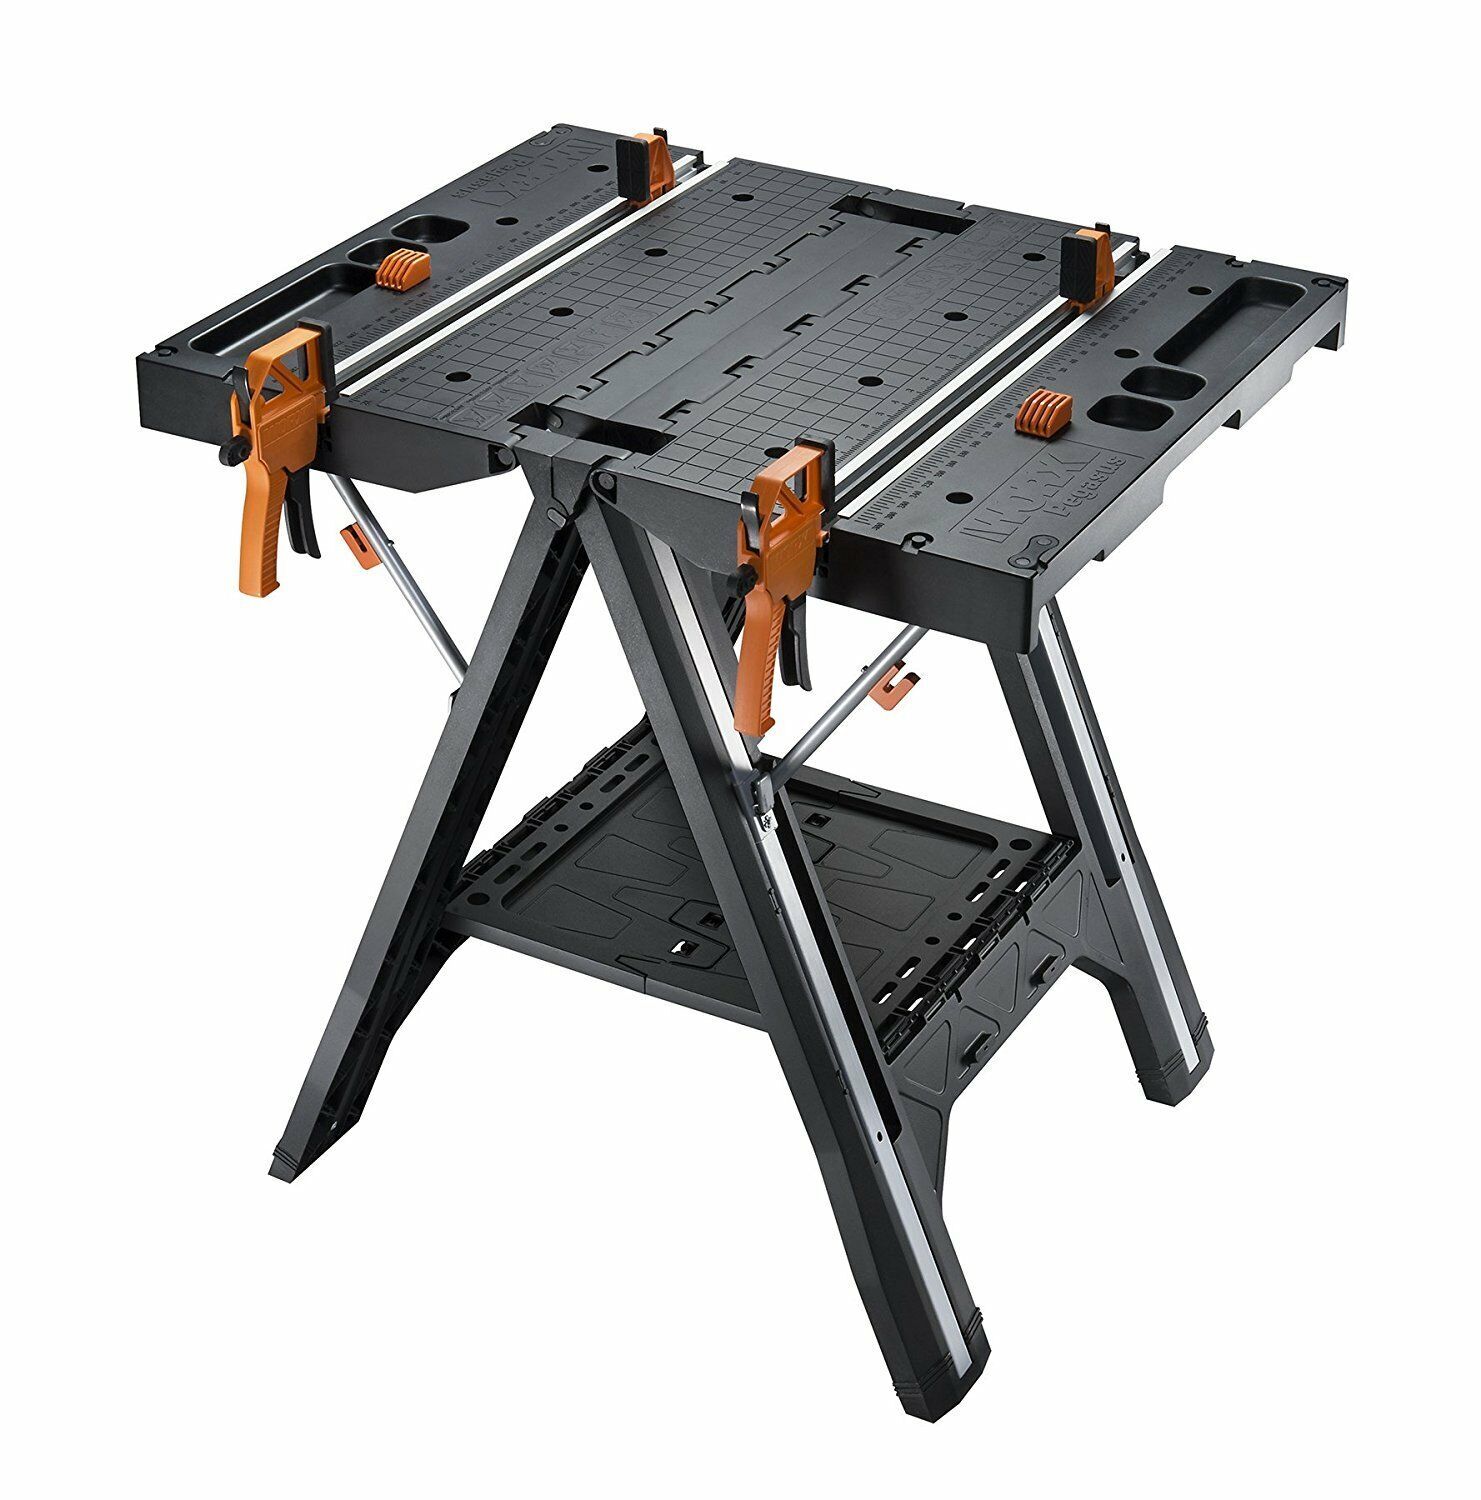 WORX PEGASUS Multi-Function Work Table & Sawhorse w/ Quick Clamps & Pegs - WX051